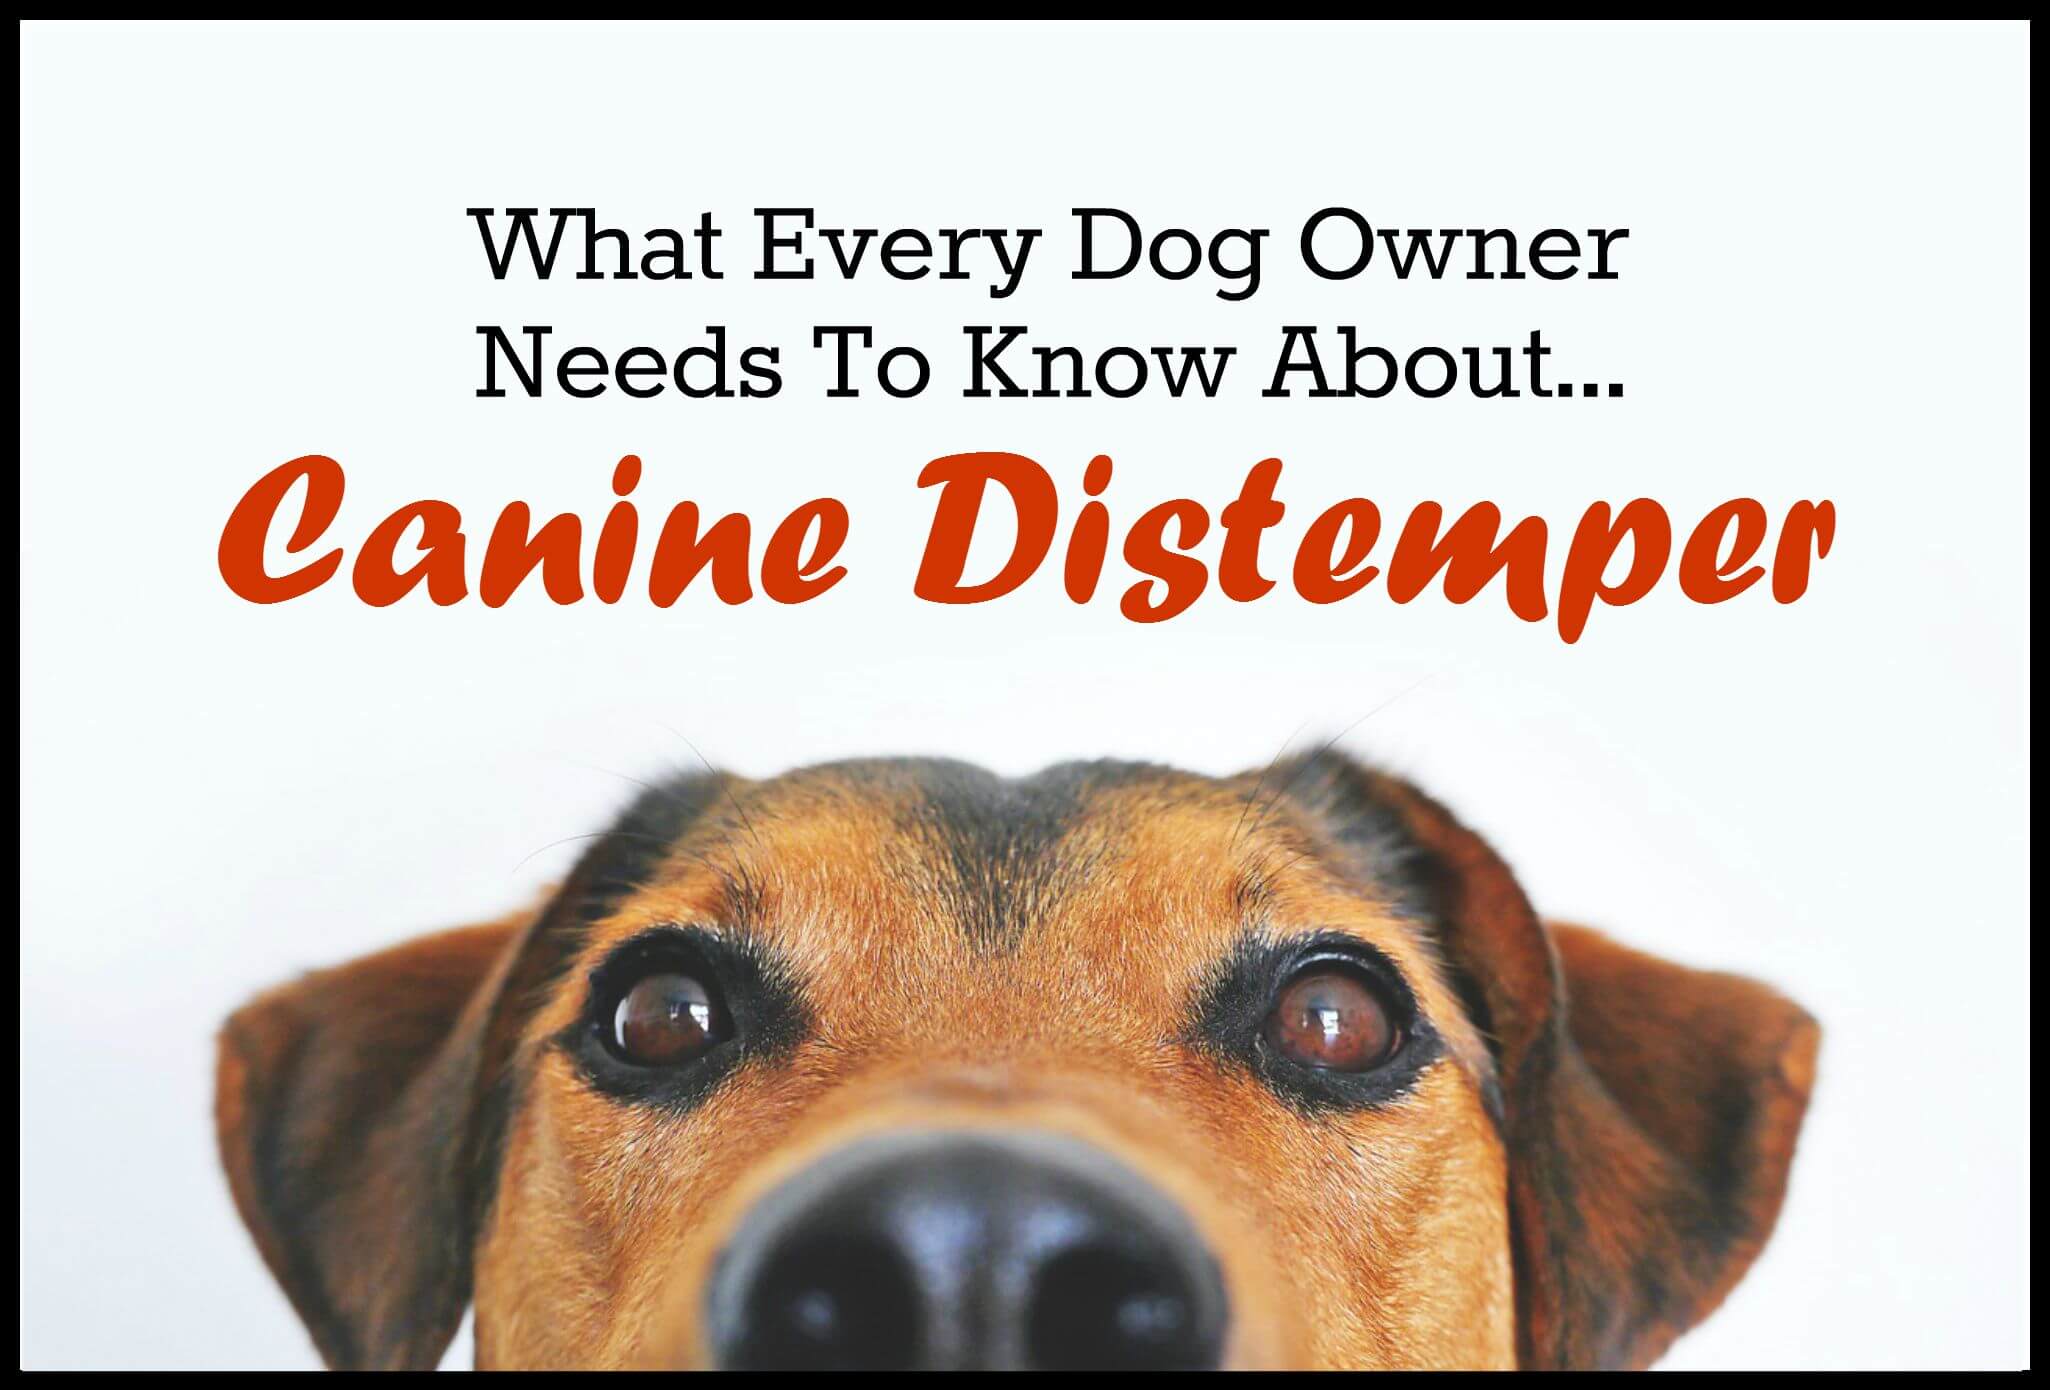 what are the signs of distemper in a dog